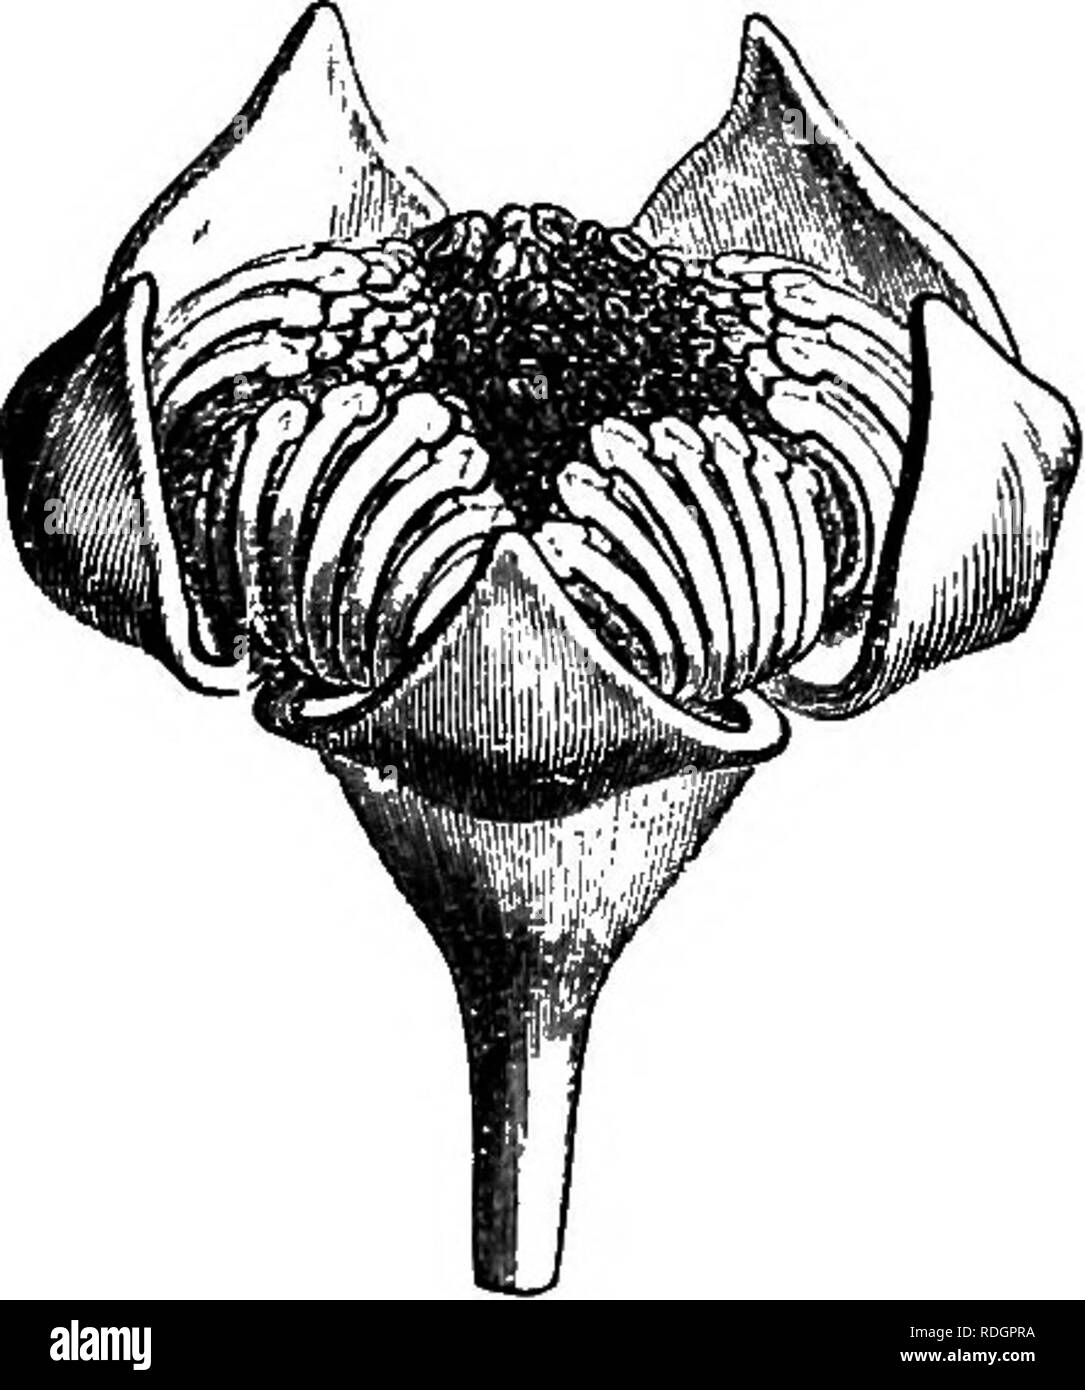 . The natural history of plants. Botany. UMBELLIFEE^. 169 ramified clusters of cymes, with articulate pedicels. The calyx is gamosepalous, 4-5-dentate; the petals are triangular and valvate; and the unilocular and uniovulate ovary is surmounted by a thick style with umbilical summit and surrounded at the base by a large epigynous 10-lobed disk. The fruit is an elongate drupe the woody putamen of which has on one side an exterior furrow corresponding to a sort of vertical incomplete false partition, to which is applied the corresponding margin of the seed. On this side the albumen has a deep fu Stock Photo